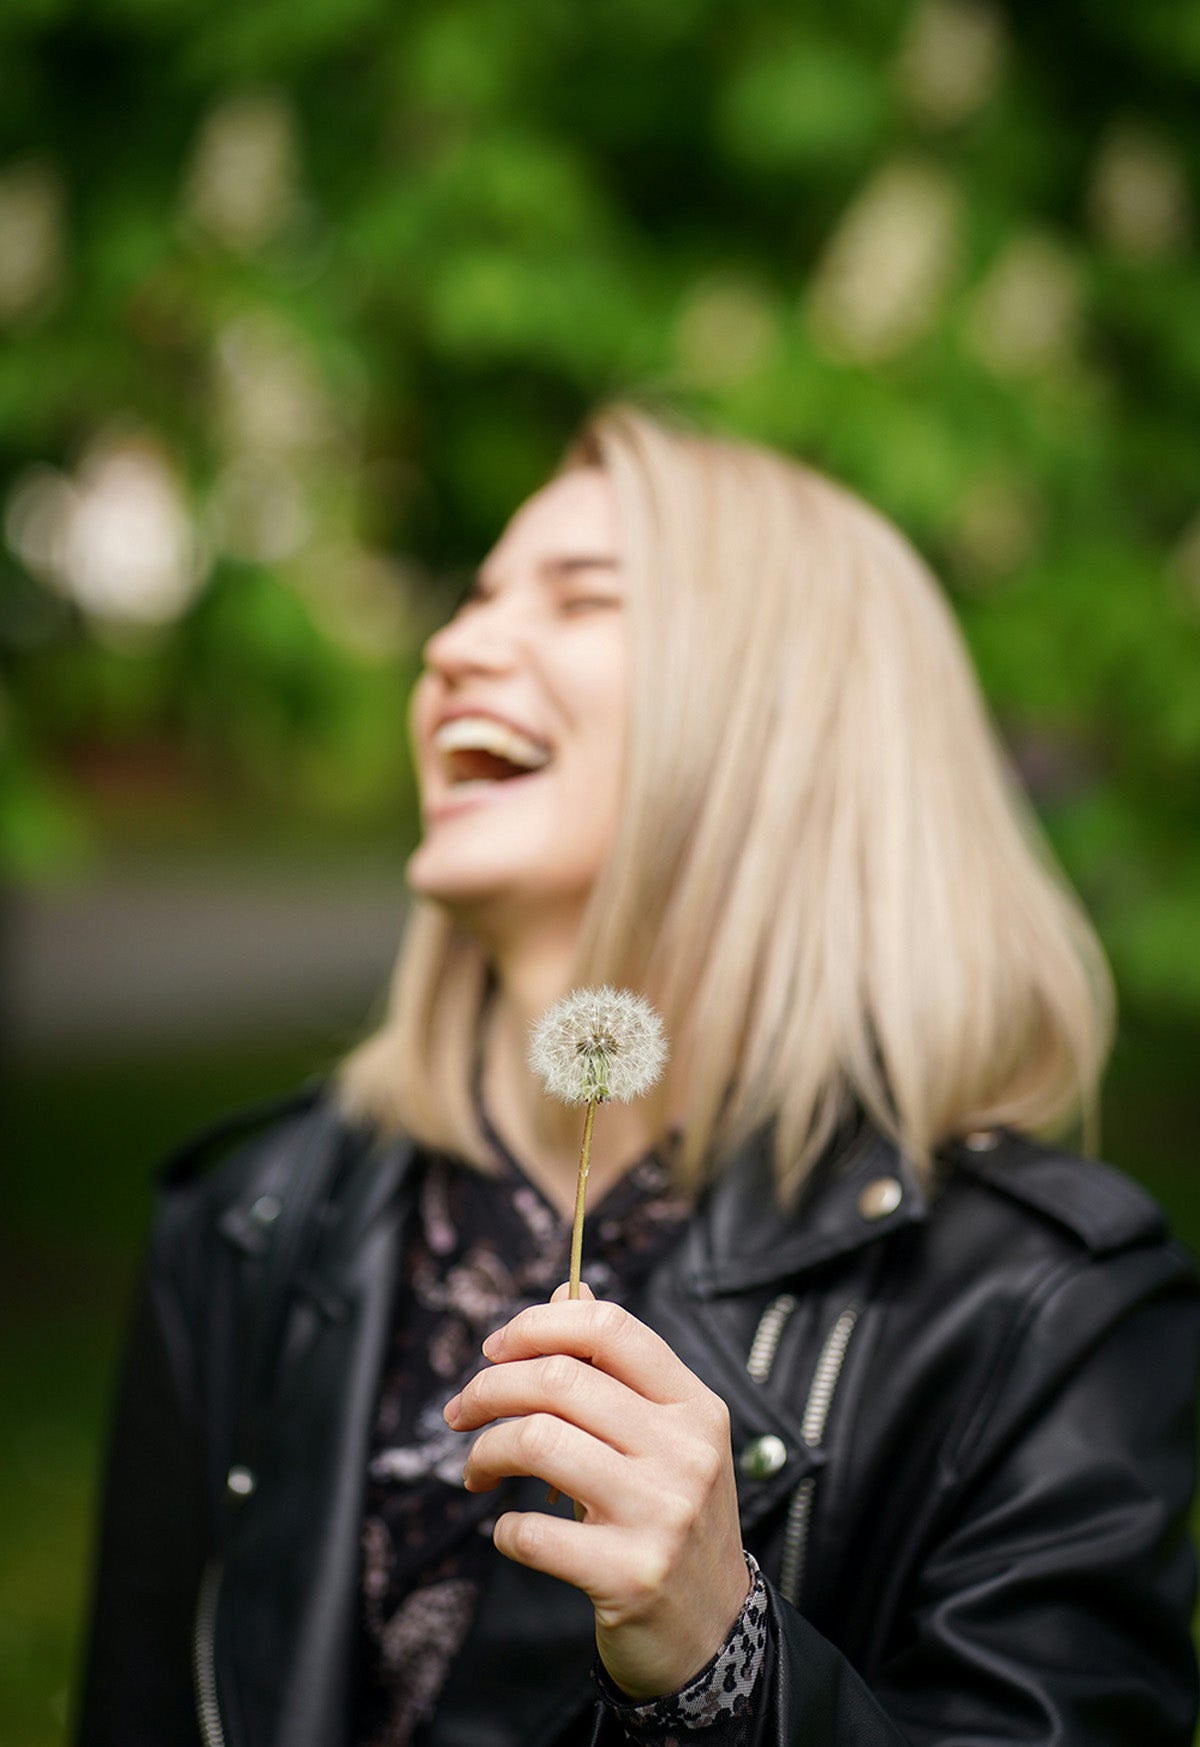 A girl in a leather motorcycle jacket laughing while holding a dandelion enjoying a chilly spring day, enjoying the smell of oakmoss covered trees.  A simple moment that will ignite memories for years to come! 